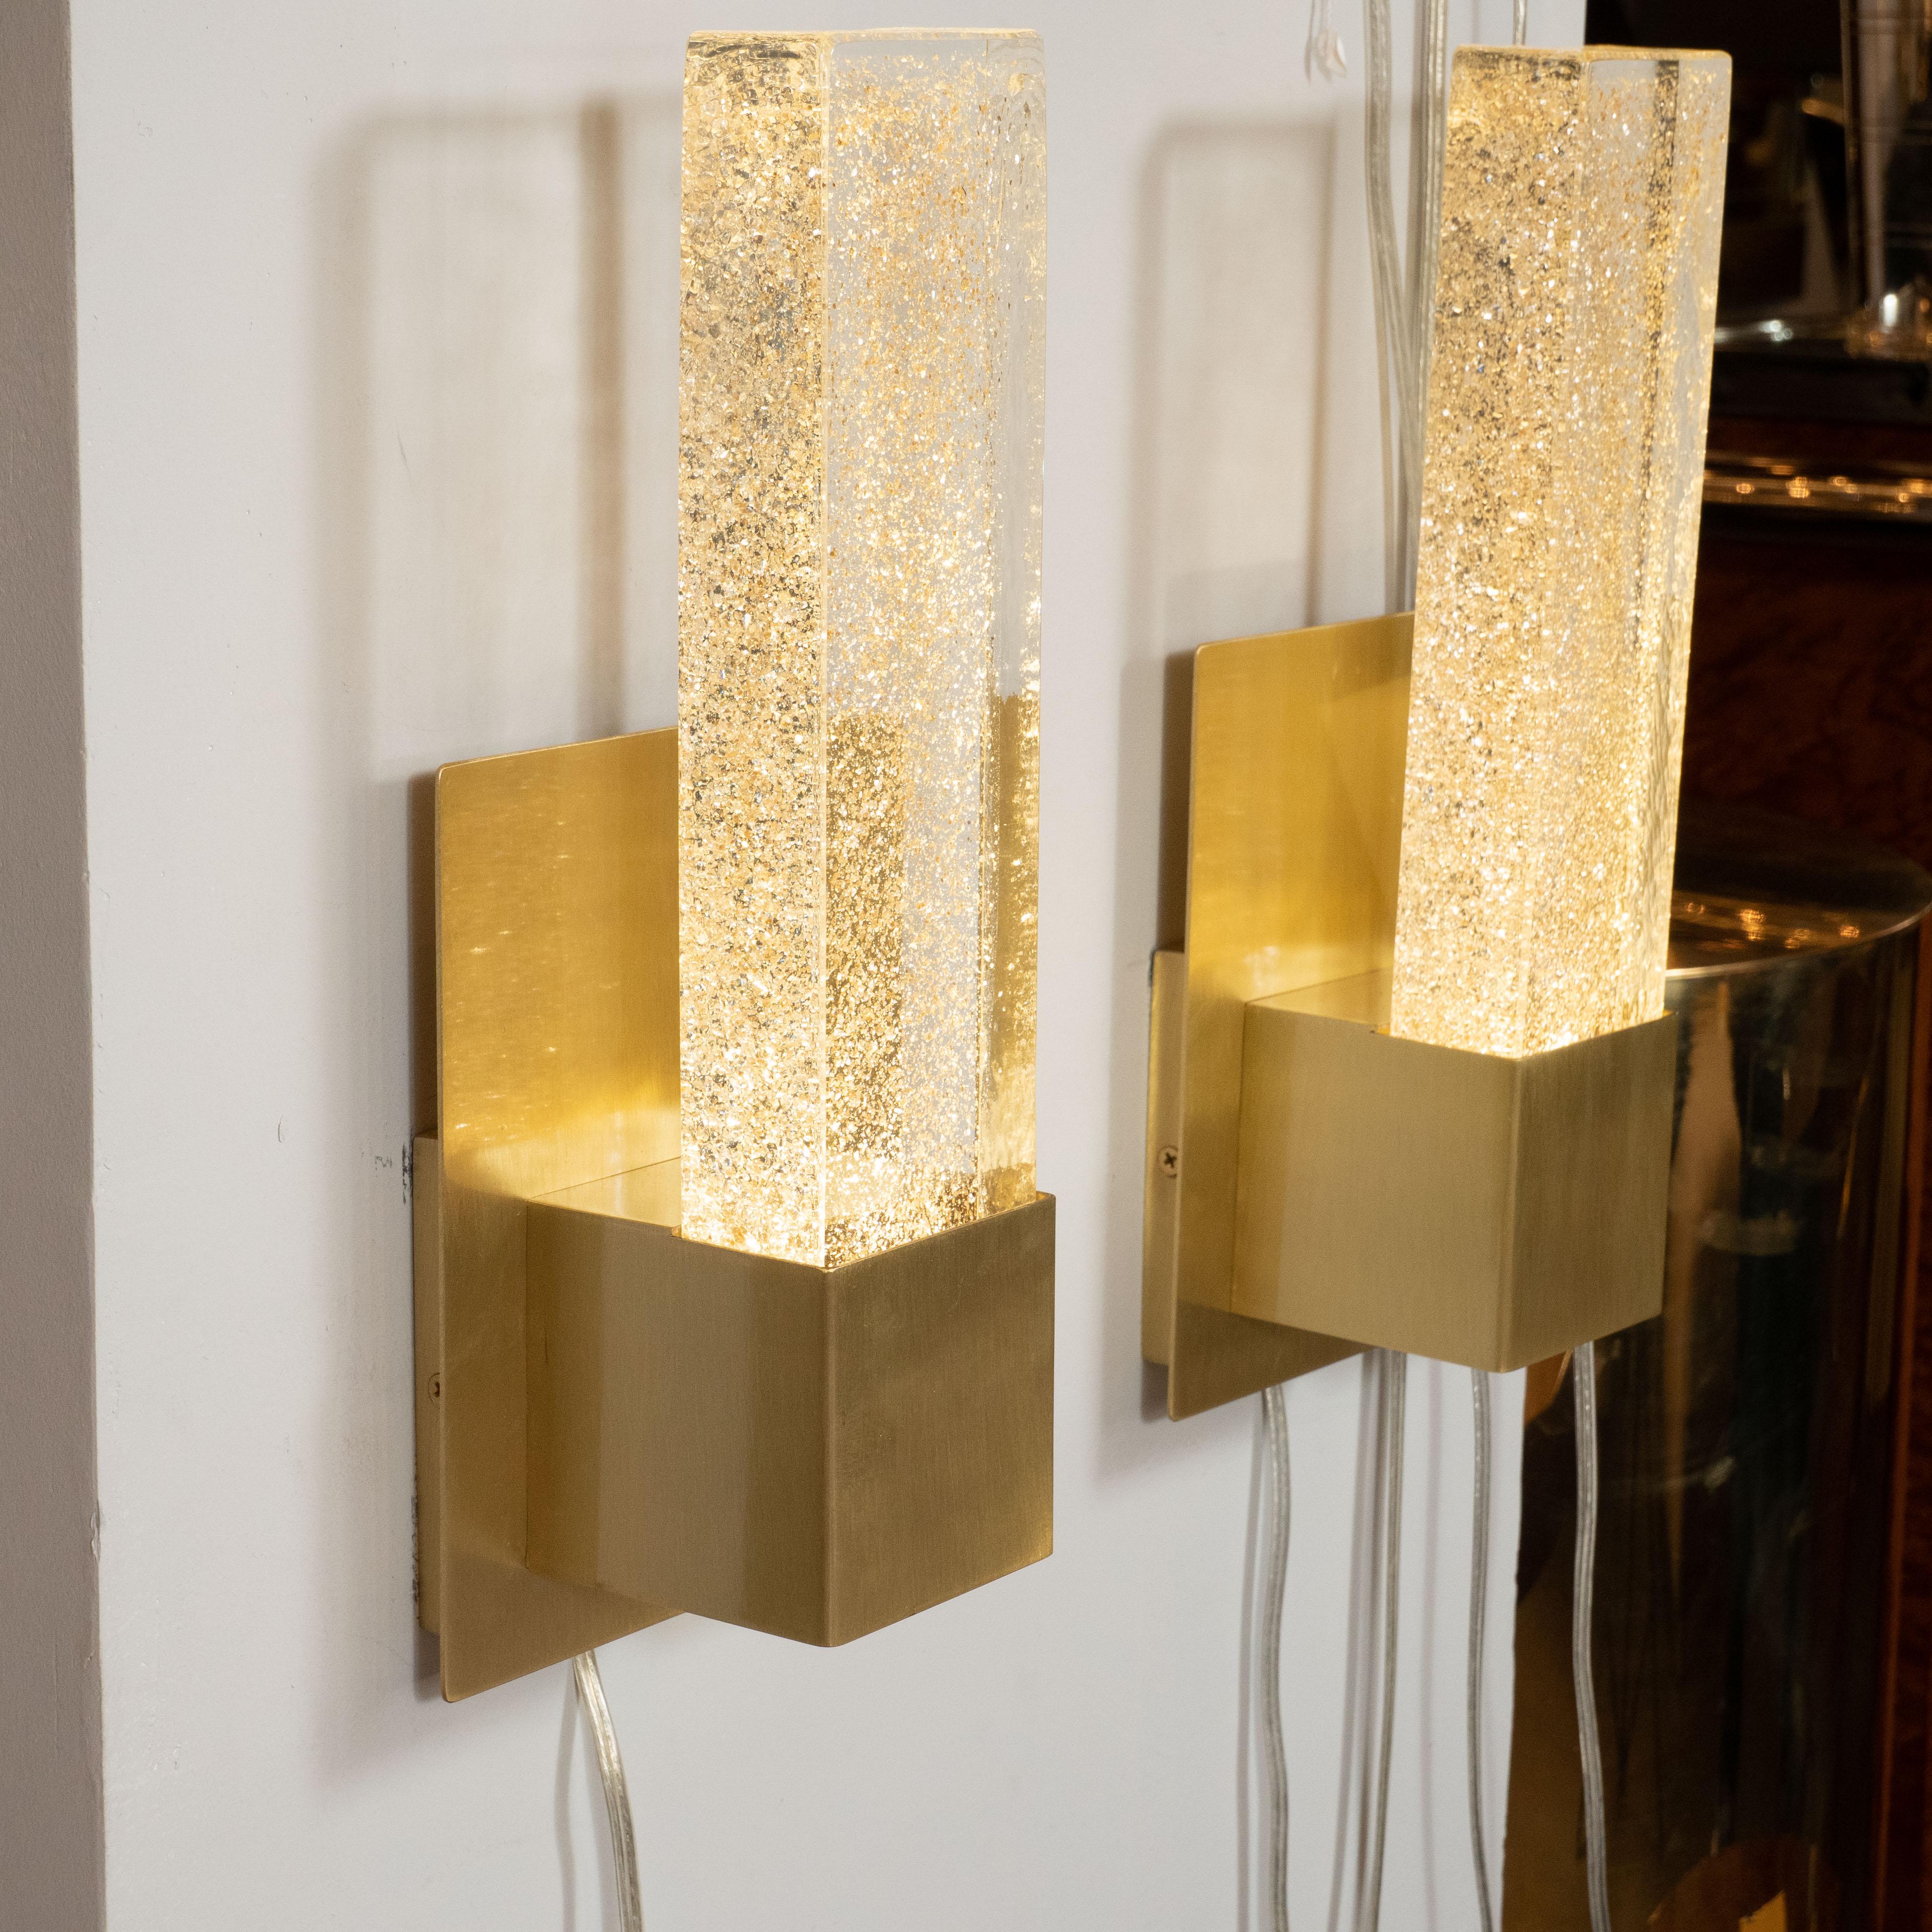 Pair of Handblown Murano Glass & Brushed Brass Sconces with 24-Karat Gold Flecks In New Condition For Sale In New York, NY